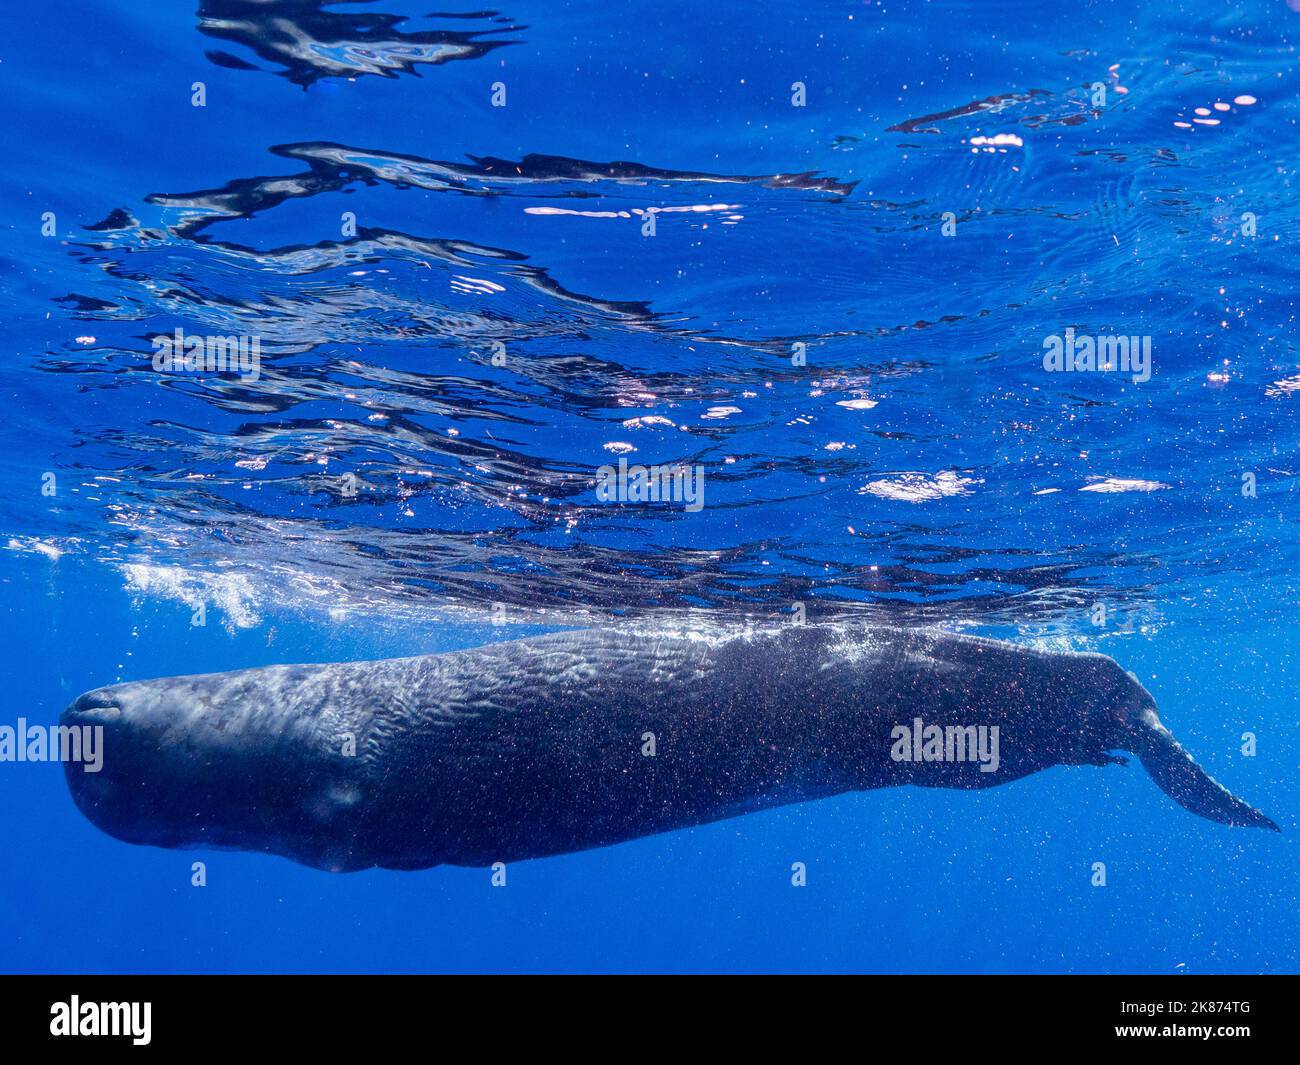 A young sperm whale (Physeter macrocephalus) swimming underwater off the coast of Roseau, Dominica, Windward Islands, West Indies, Caribbean Stock Photo